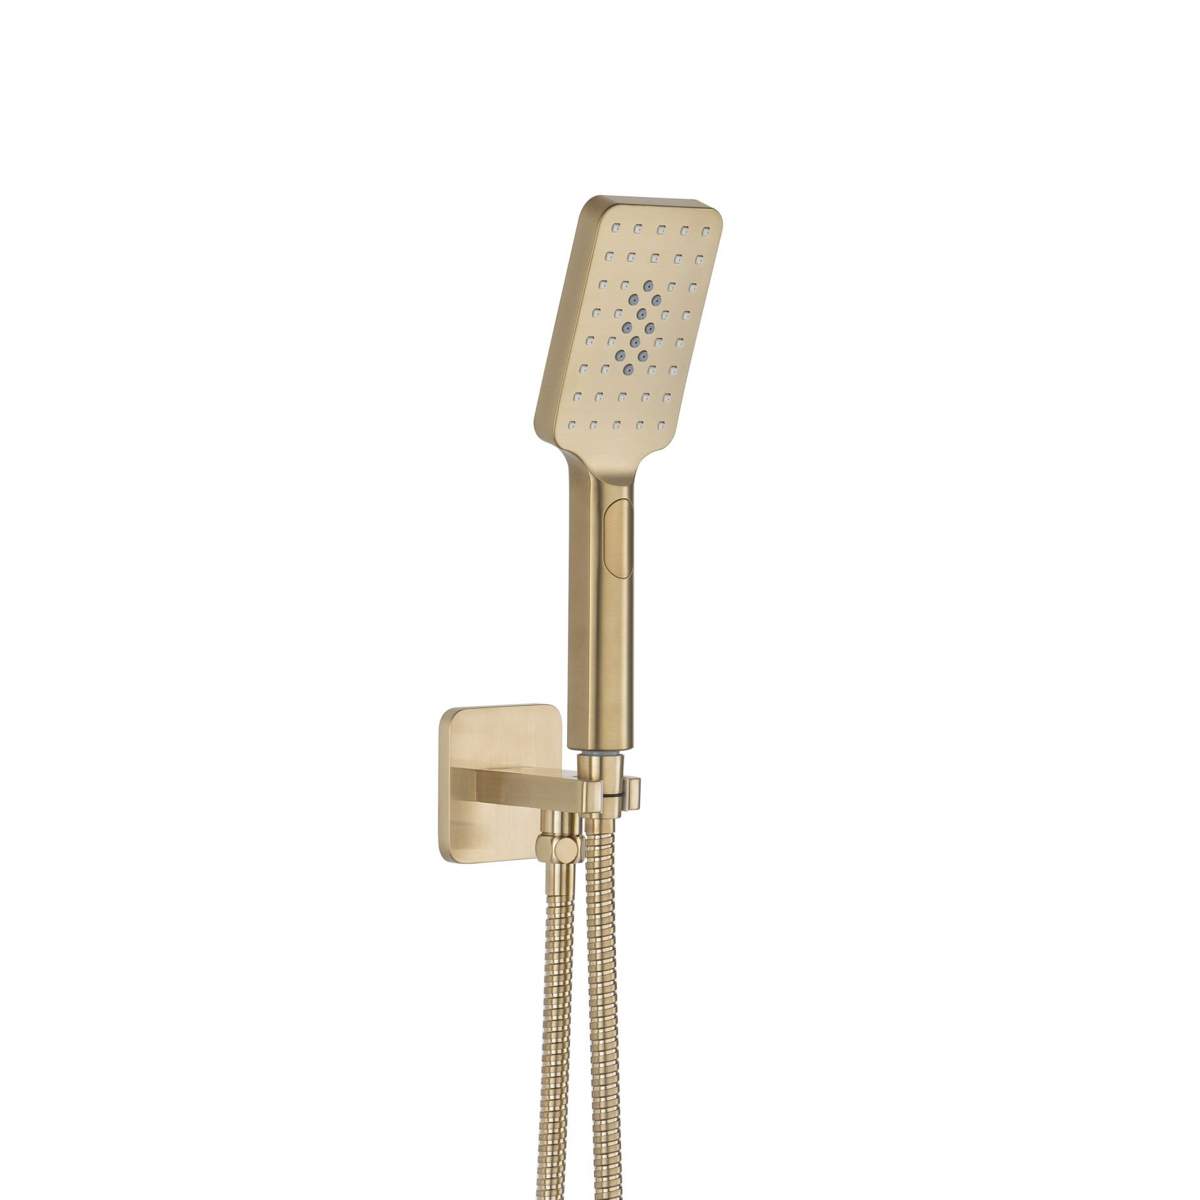 JTP Hix Brushed Brass Square Water Outlet with Holder, Hose and Hand Shower